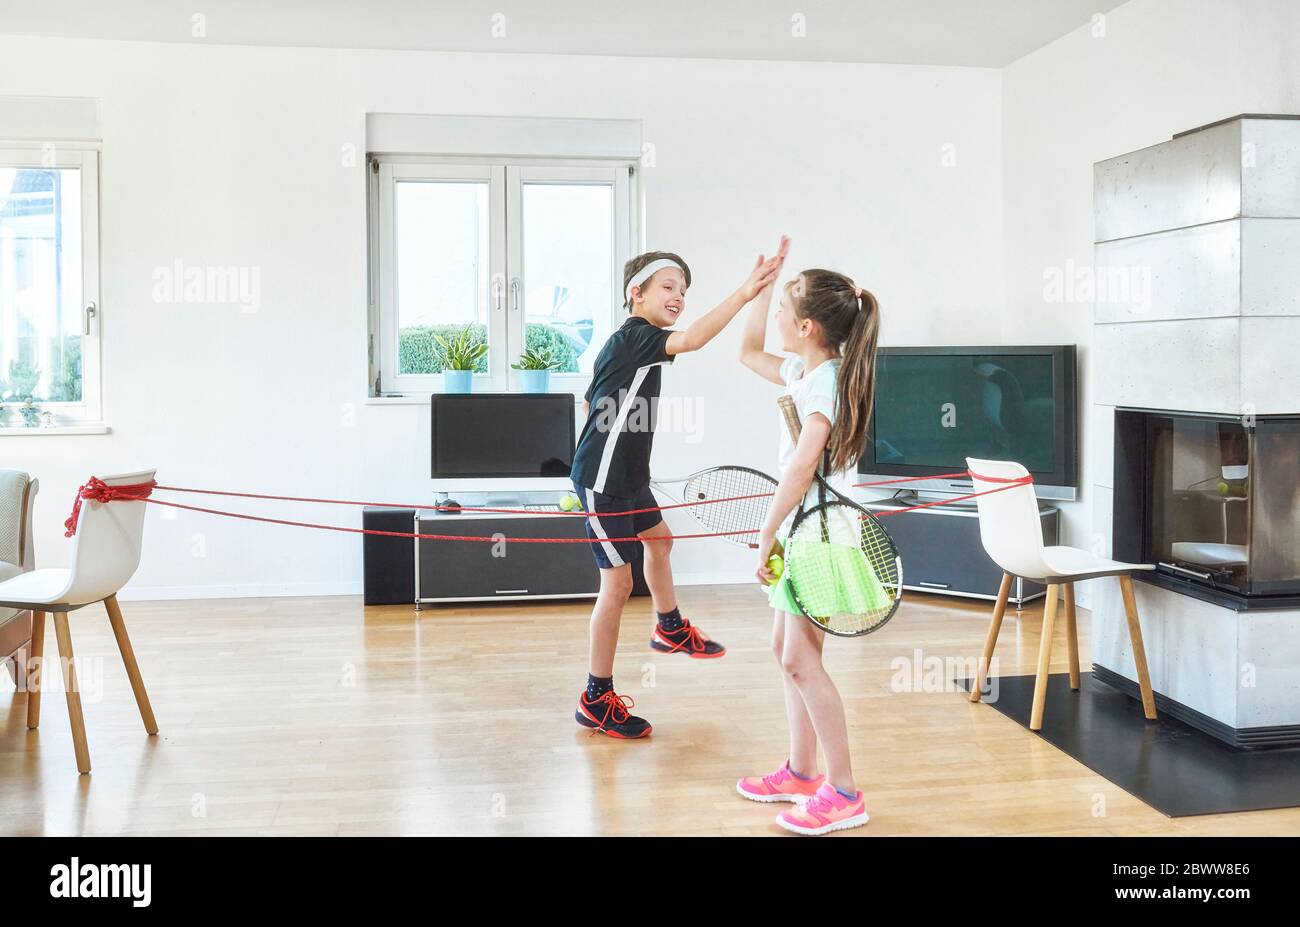 Happy siblings giving high-five while playing tennis at home during pandemic situation Stock Photo